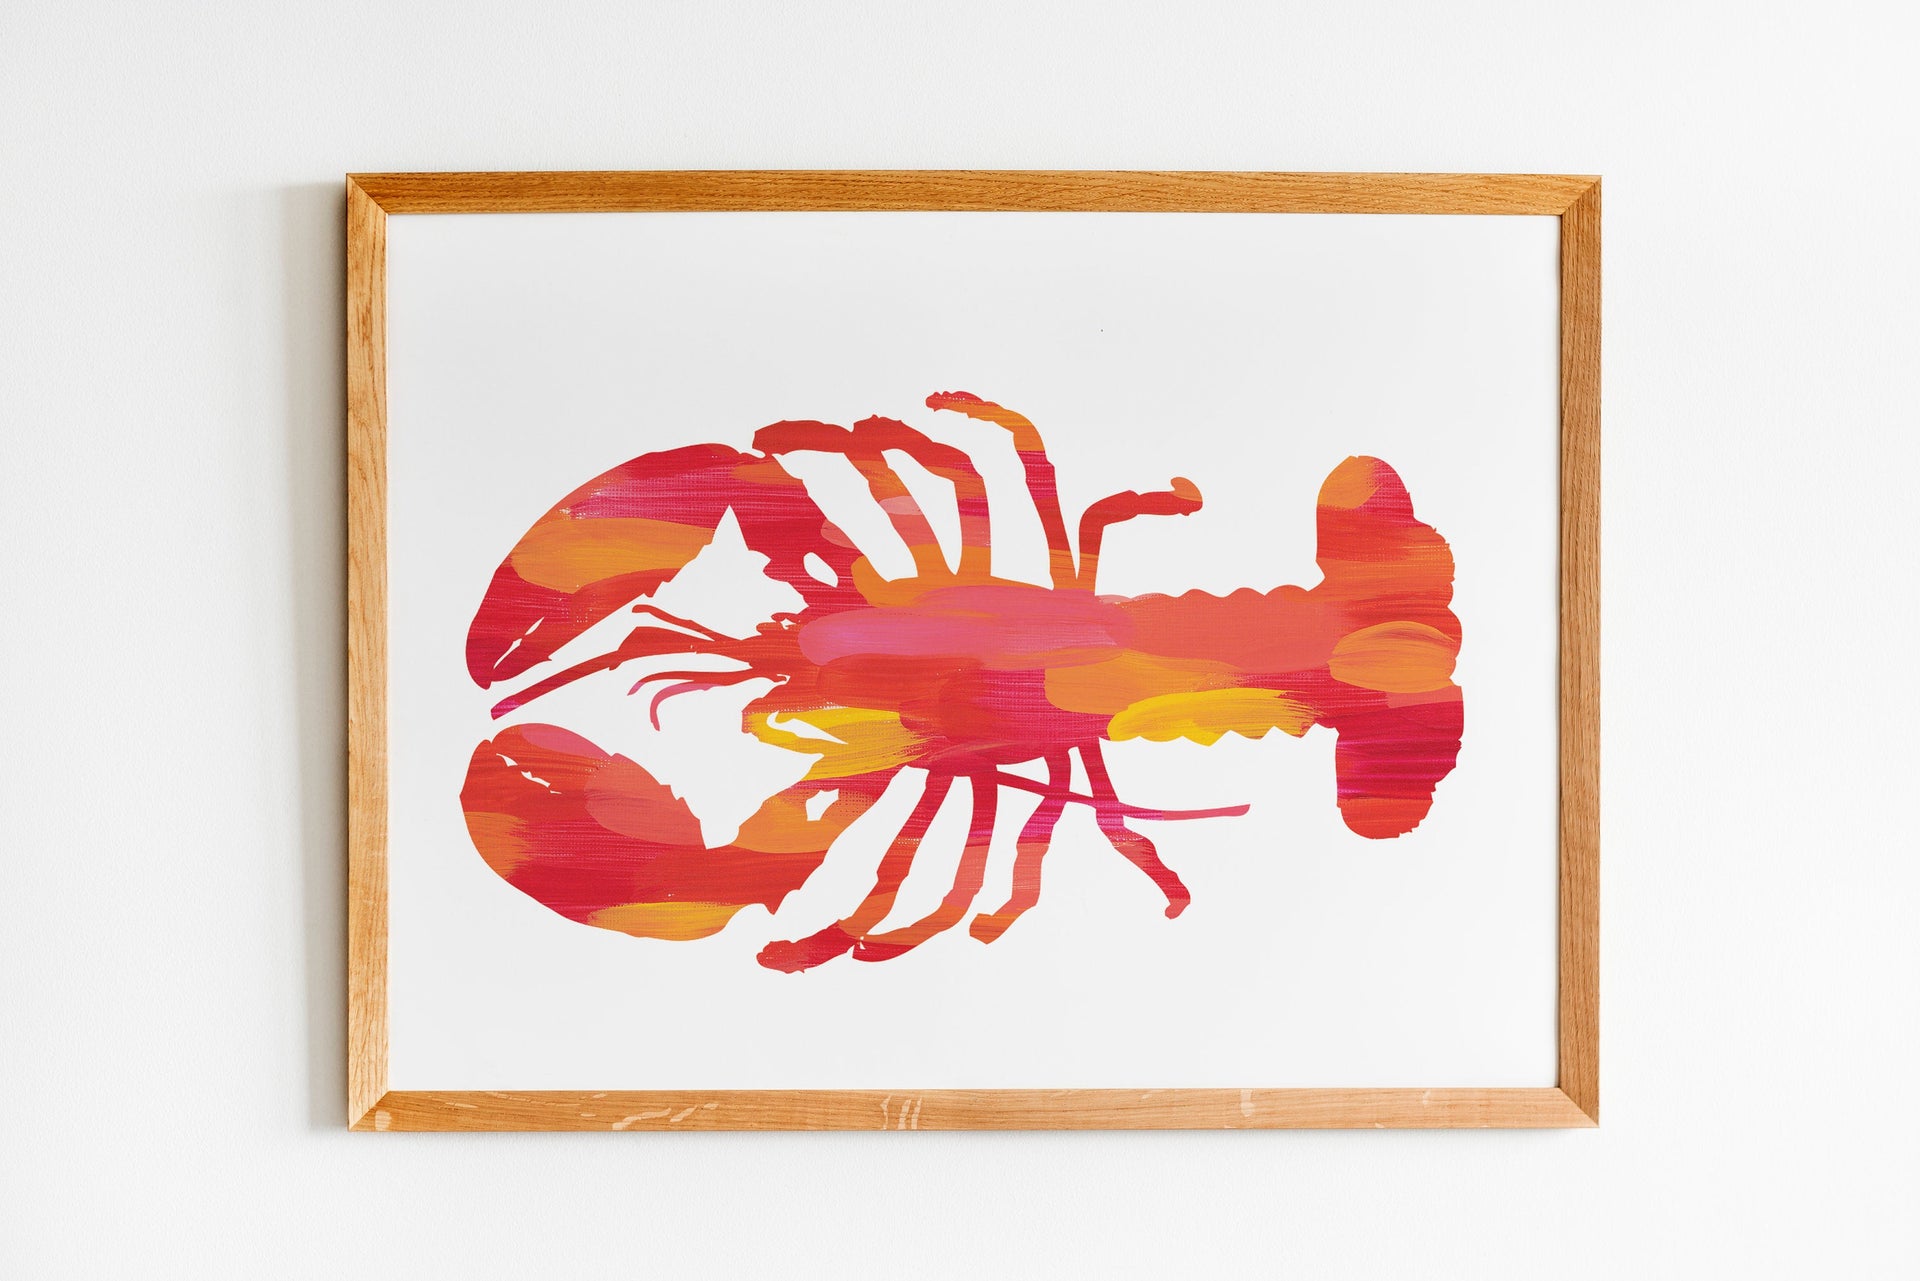 Bright Pink and Orange Lobster Print Hanging Horizontally by Gert & Co